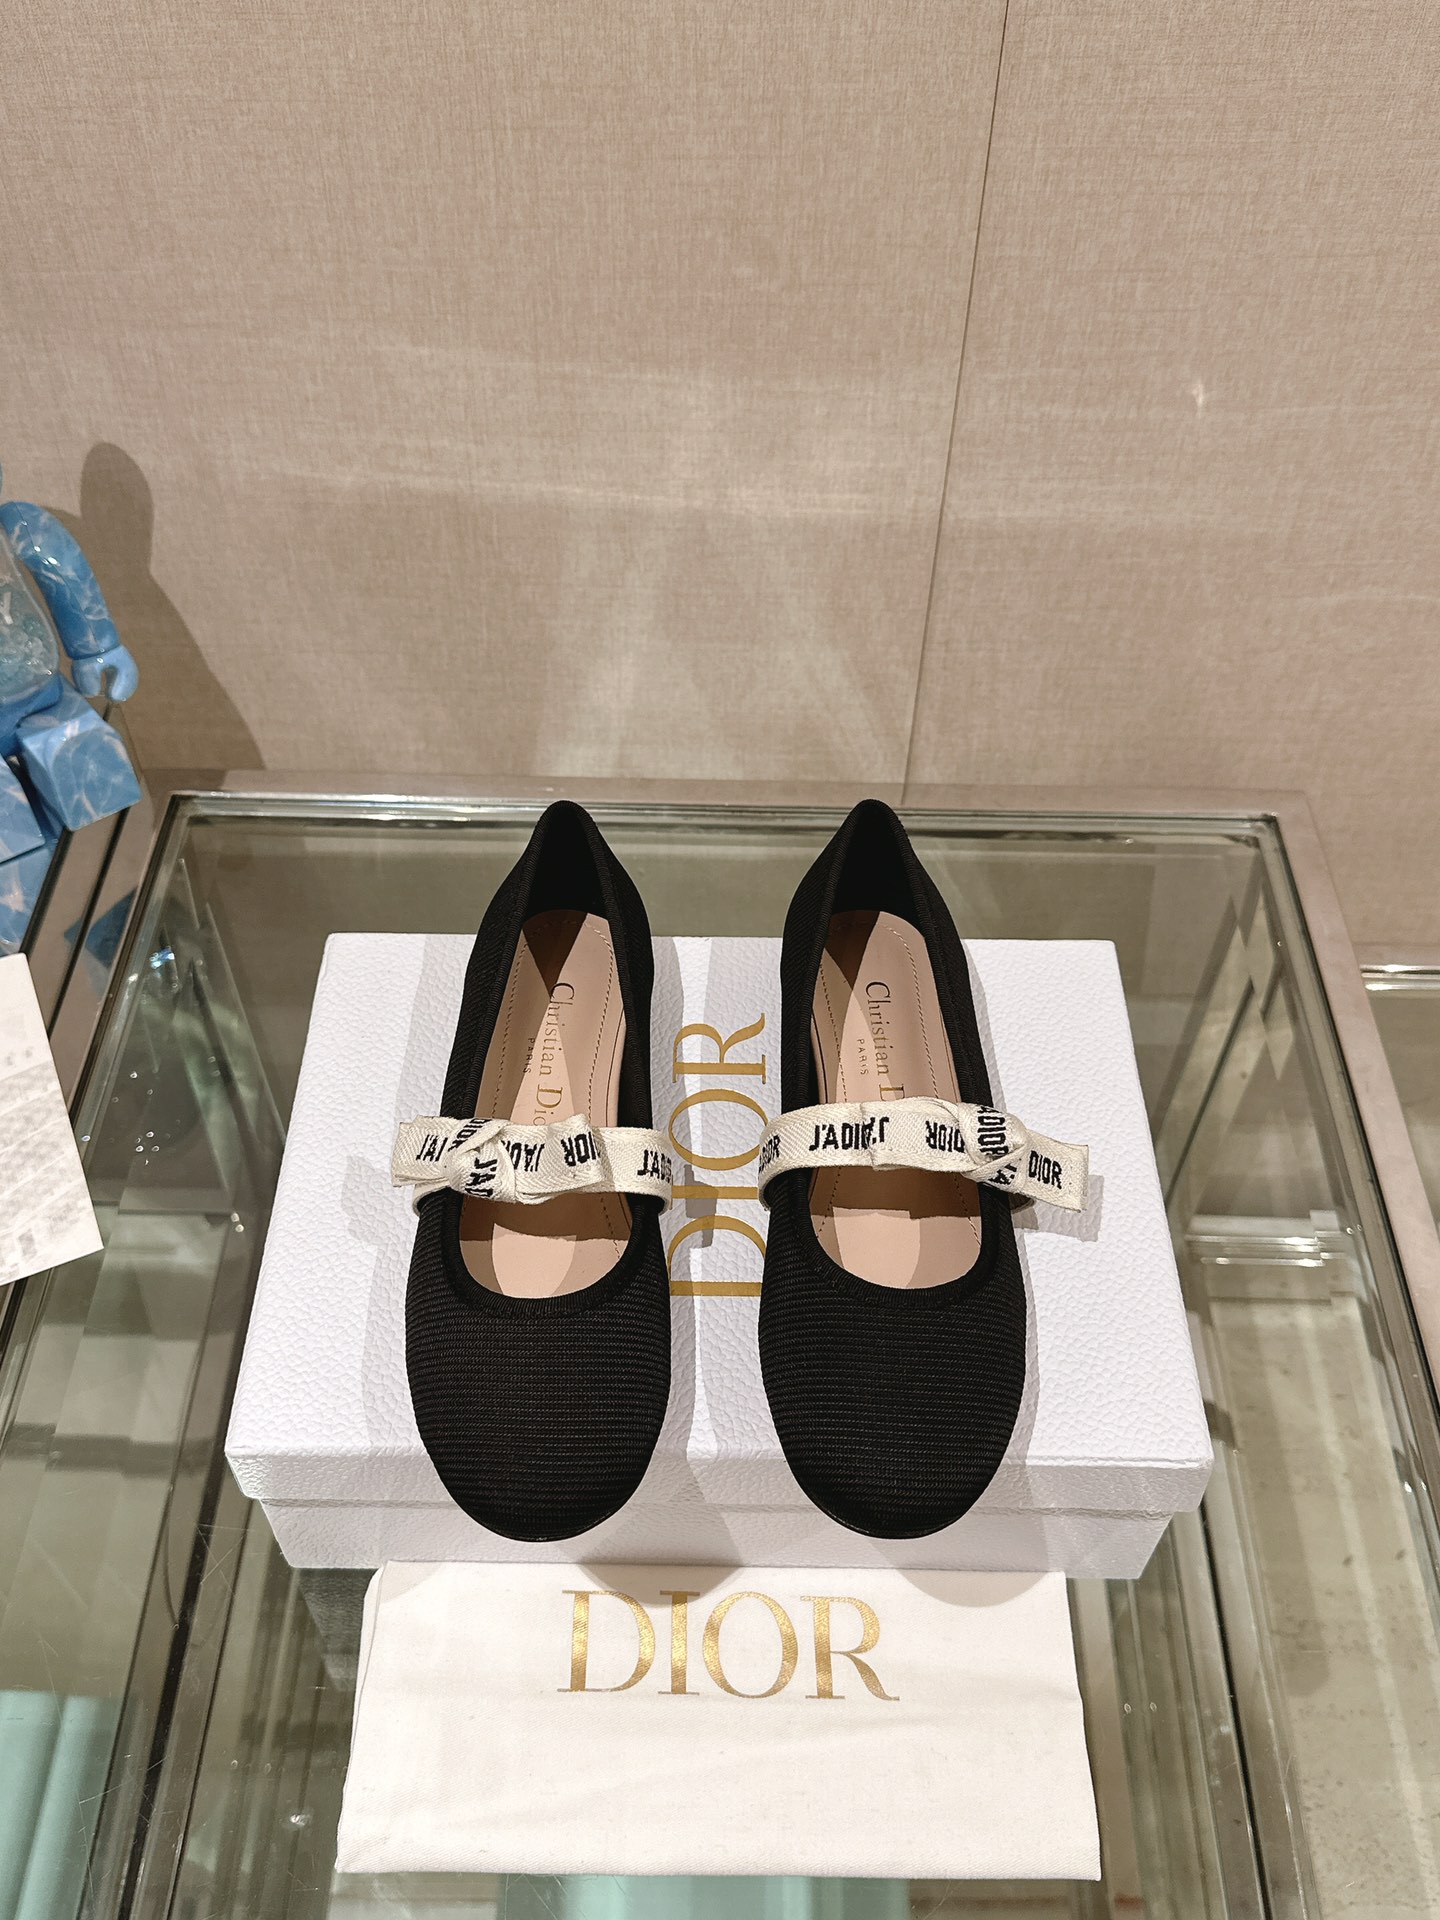 Dior Buy Flat Shoes Single Layer Shoes Embroidery Sheepskin